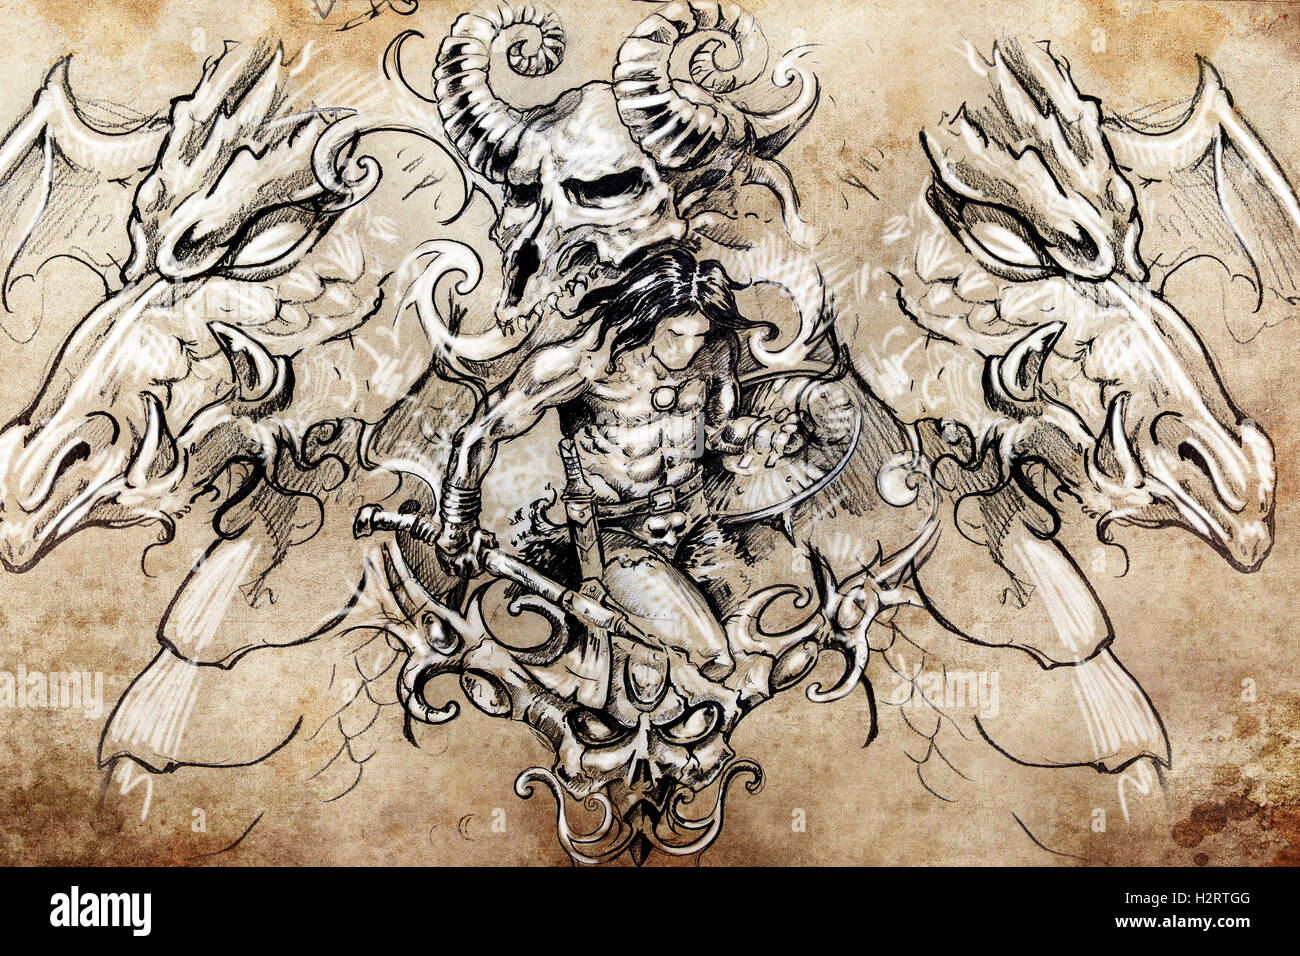 warrior with dragons, Tattoo sketch, handmade design over vintag Stock Photo